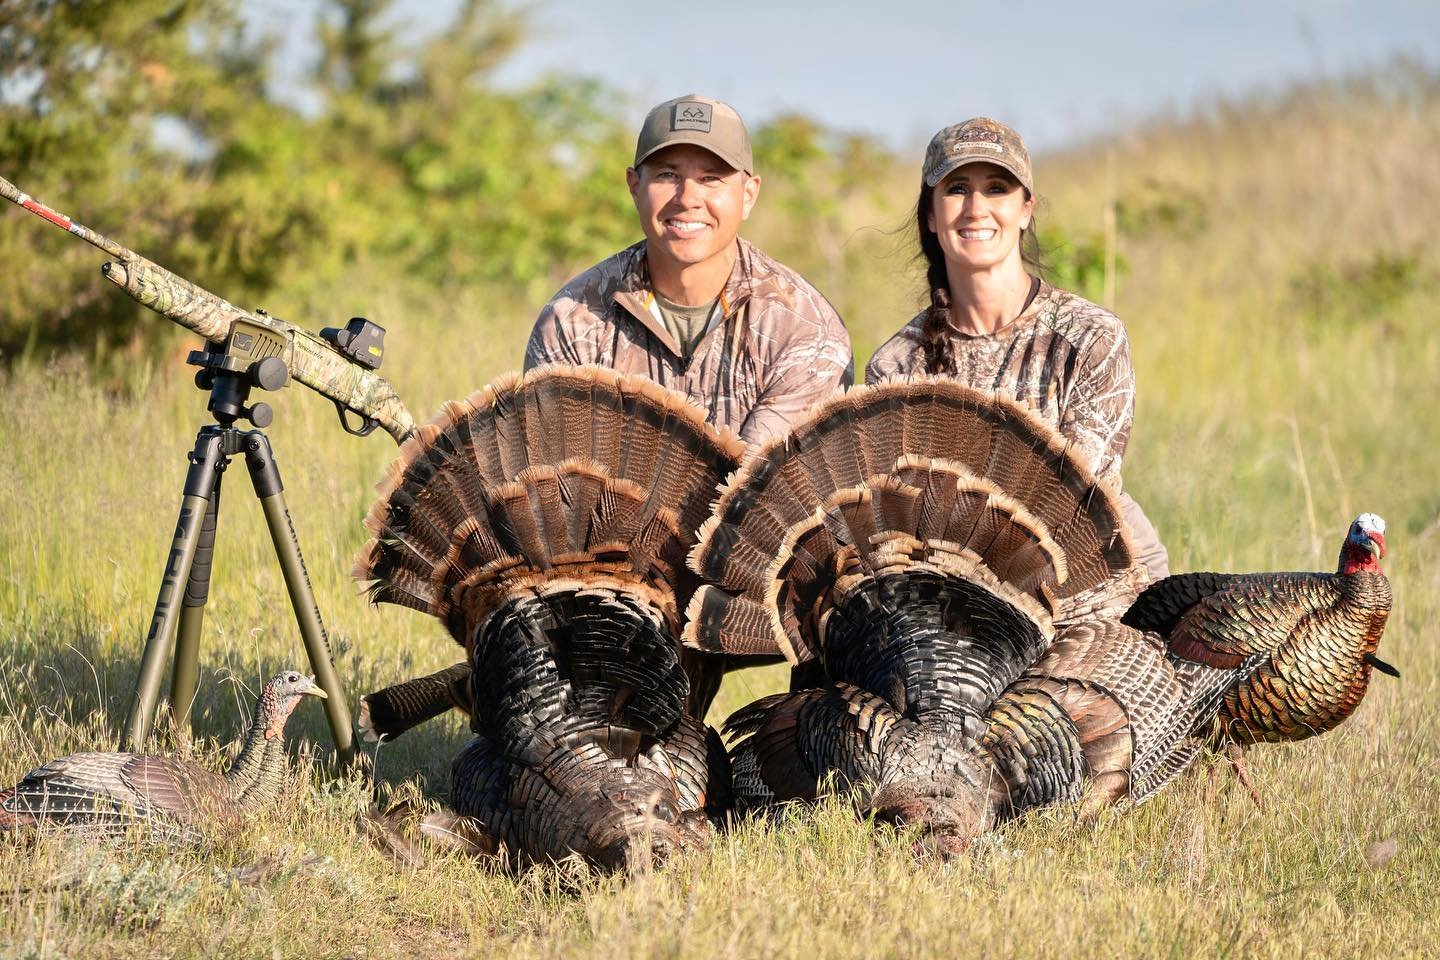 Ben doubled up with the 20-gauge, and I was behind the camera. Take a look at those spurs! Cool footage coming up next! 🦃 #WinchesterDeadlyPassion